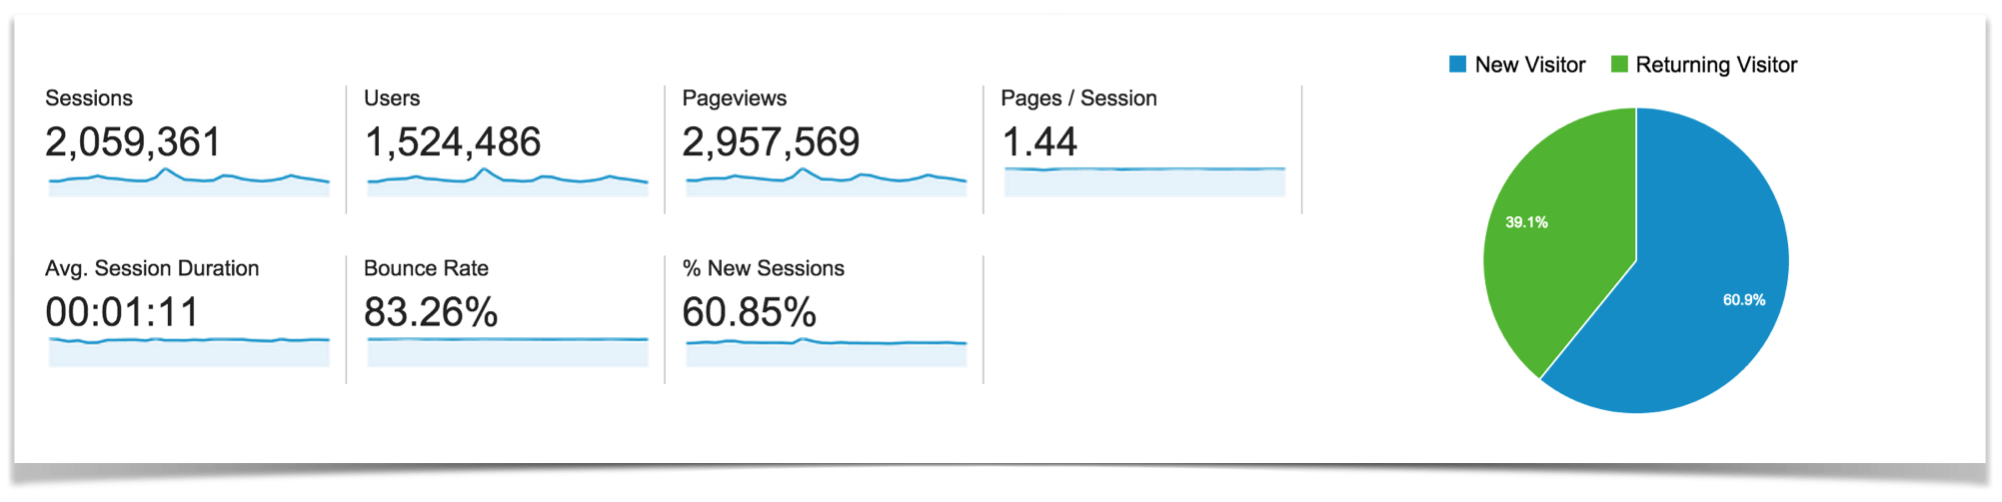 Google Analytics Traffic Overview for April.